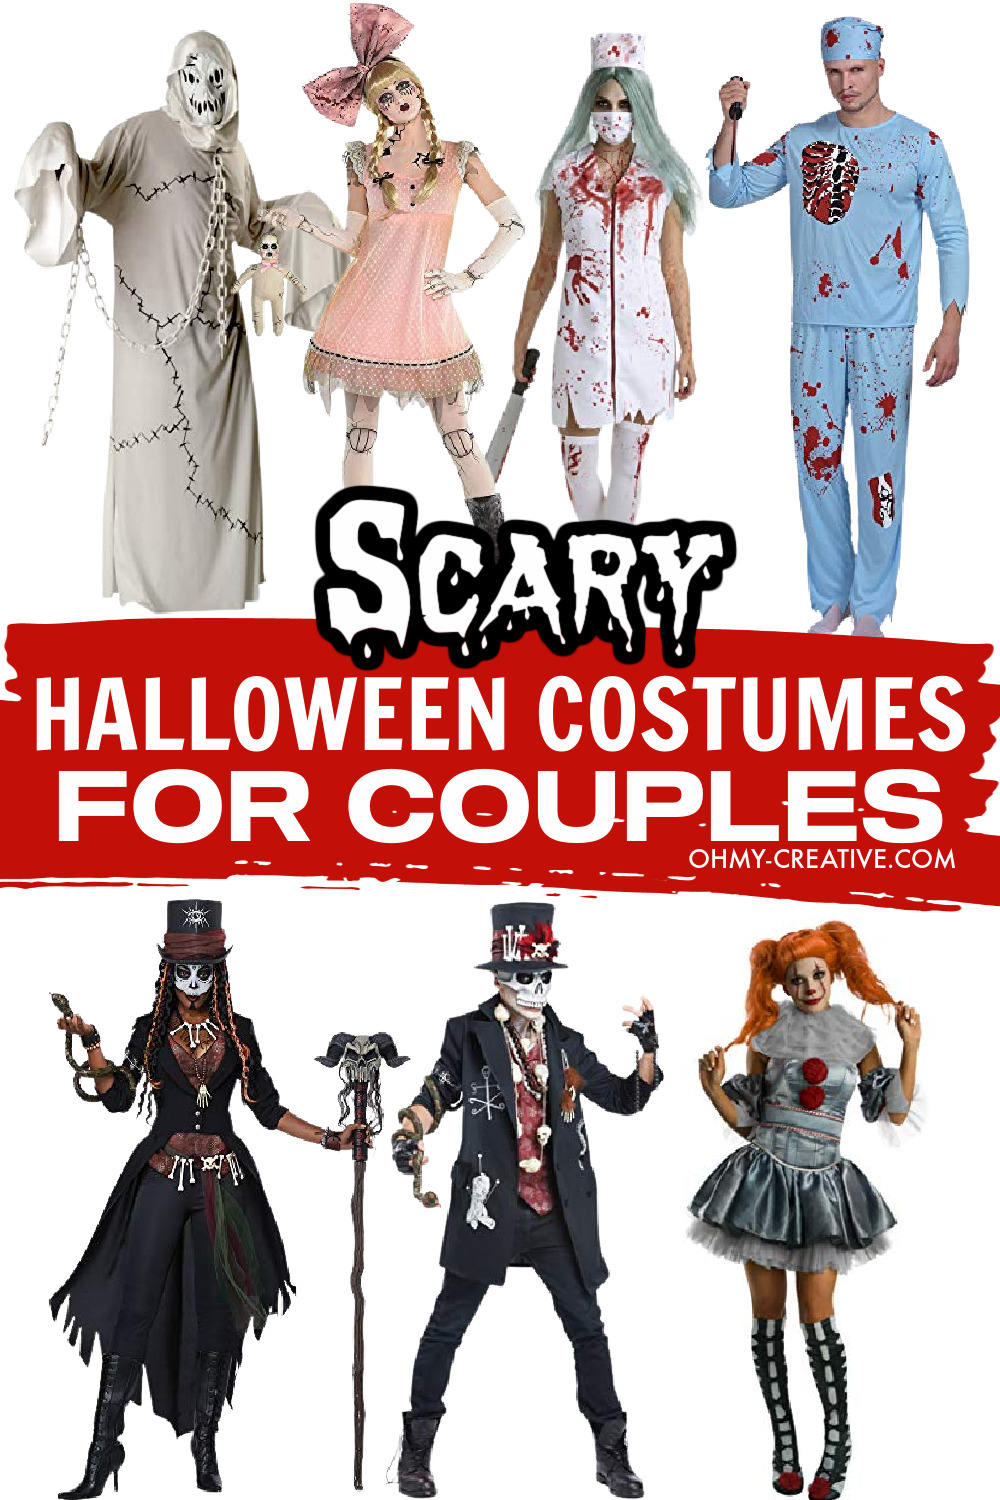 Scary Halloween Costumes For Couples - Oh My Creative